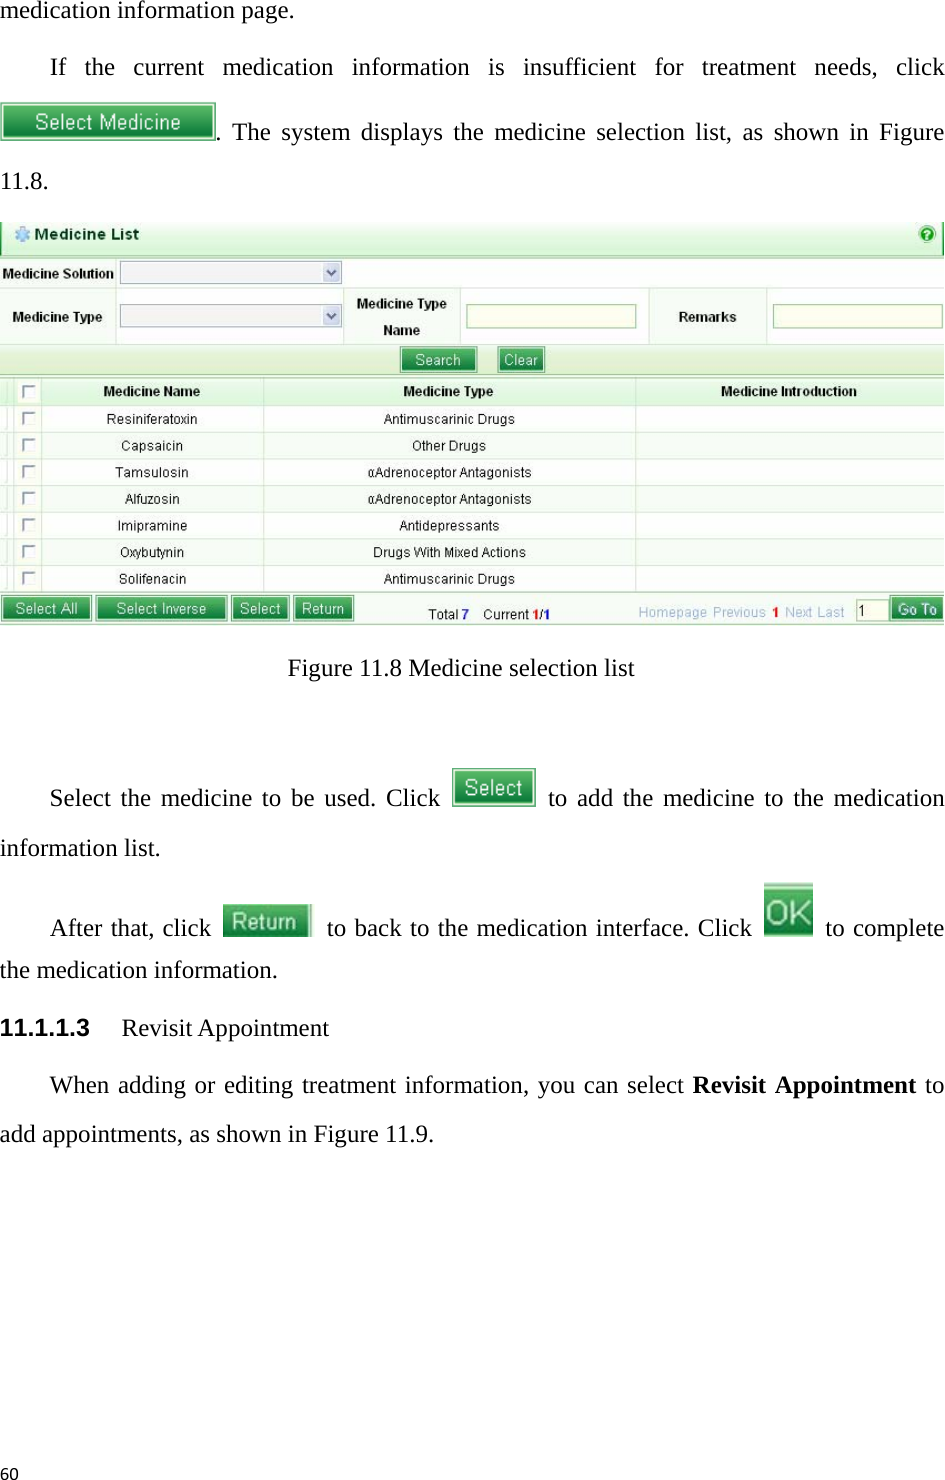 60medication information page.   If the current medication information is insufficient for treatment needs, click . The system displays the medicine selection list, as shown in Figure 11.8.   Figure 11.8 Medicine selection list    Select the medicine to be used. Click   to add the medicine to the medication information list. After that, click    to back to the medication interface. Click   to complete the medication information.   11.1.1.3   Revisit Appointment When adding or editing treatment information, you can select Revisit Appointment to add appointments, as shown in Figure 11.9.   